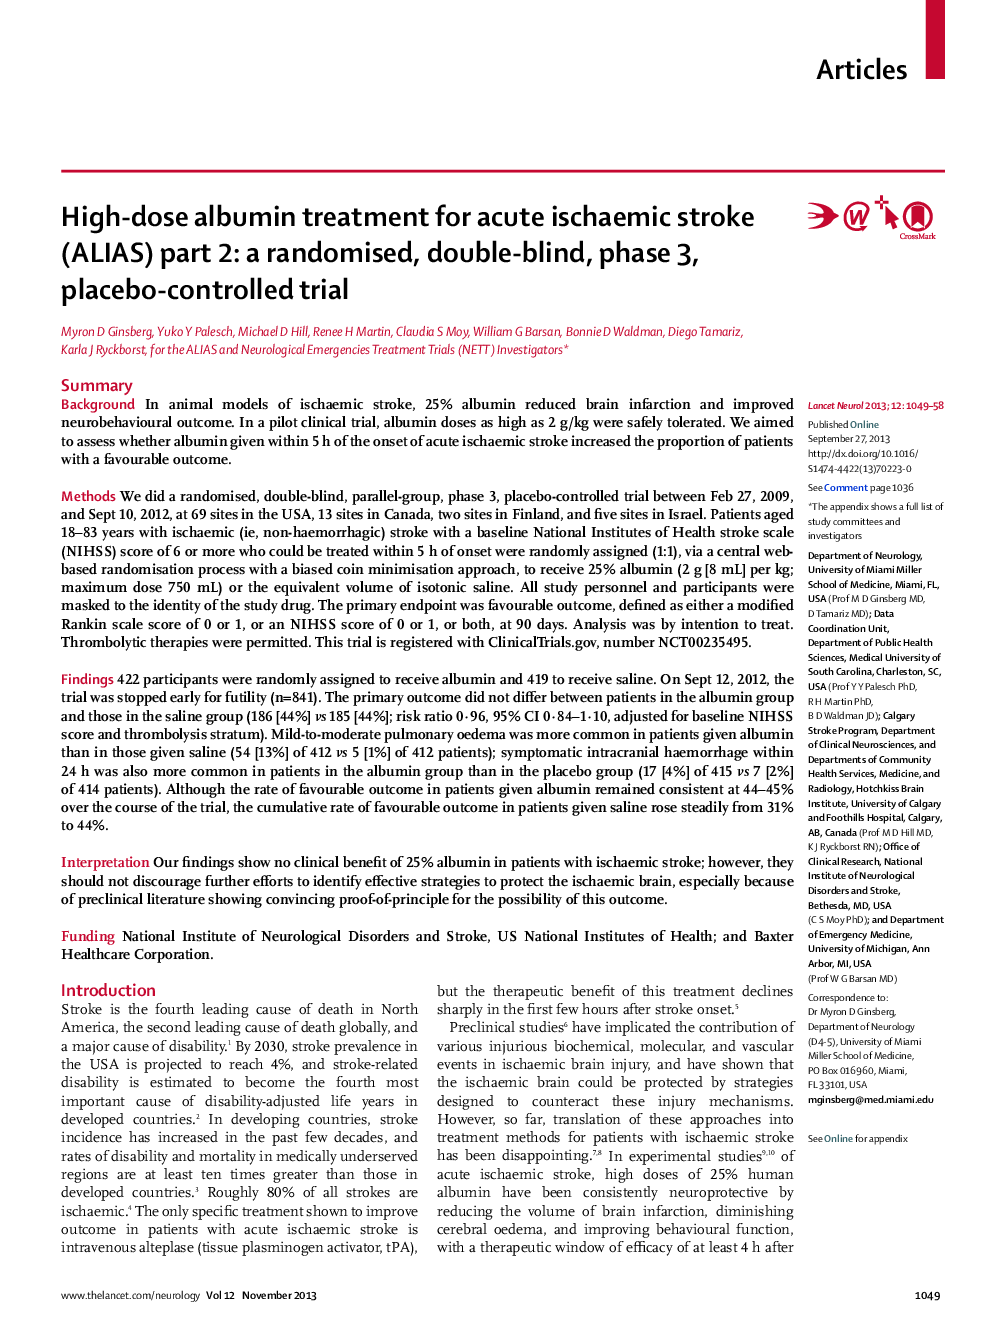 High-dose albumin treatment for acute ischaemic stroke (ALIAS) part 2: a randomised, double-blind, phase 3, placebo-controlled trial